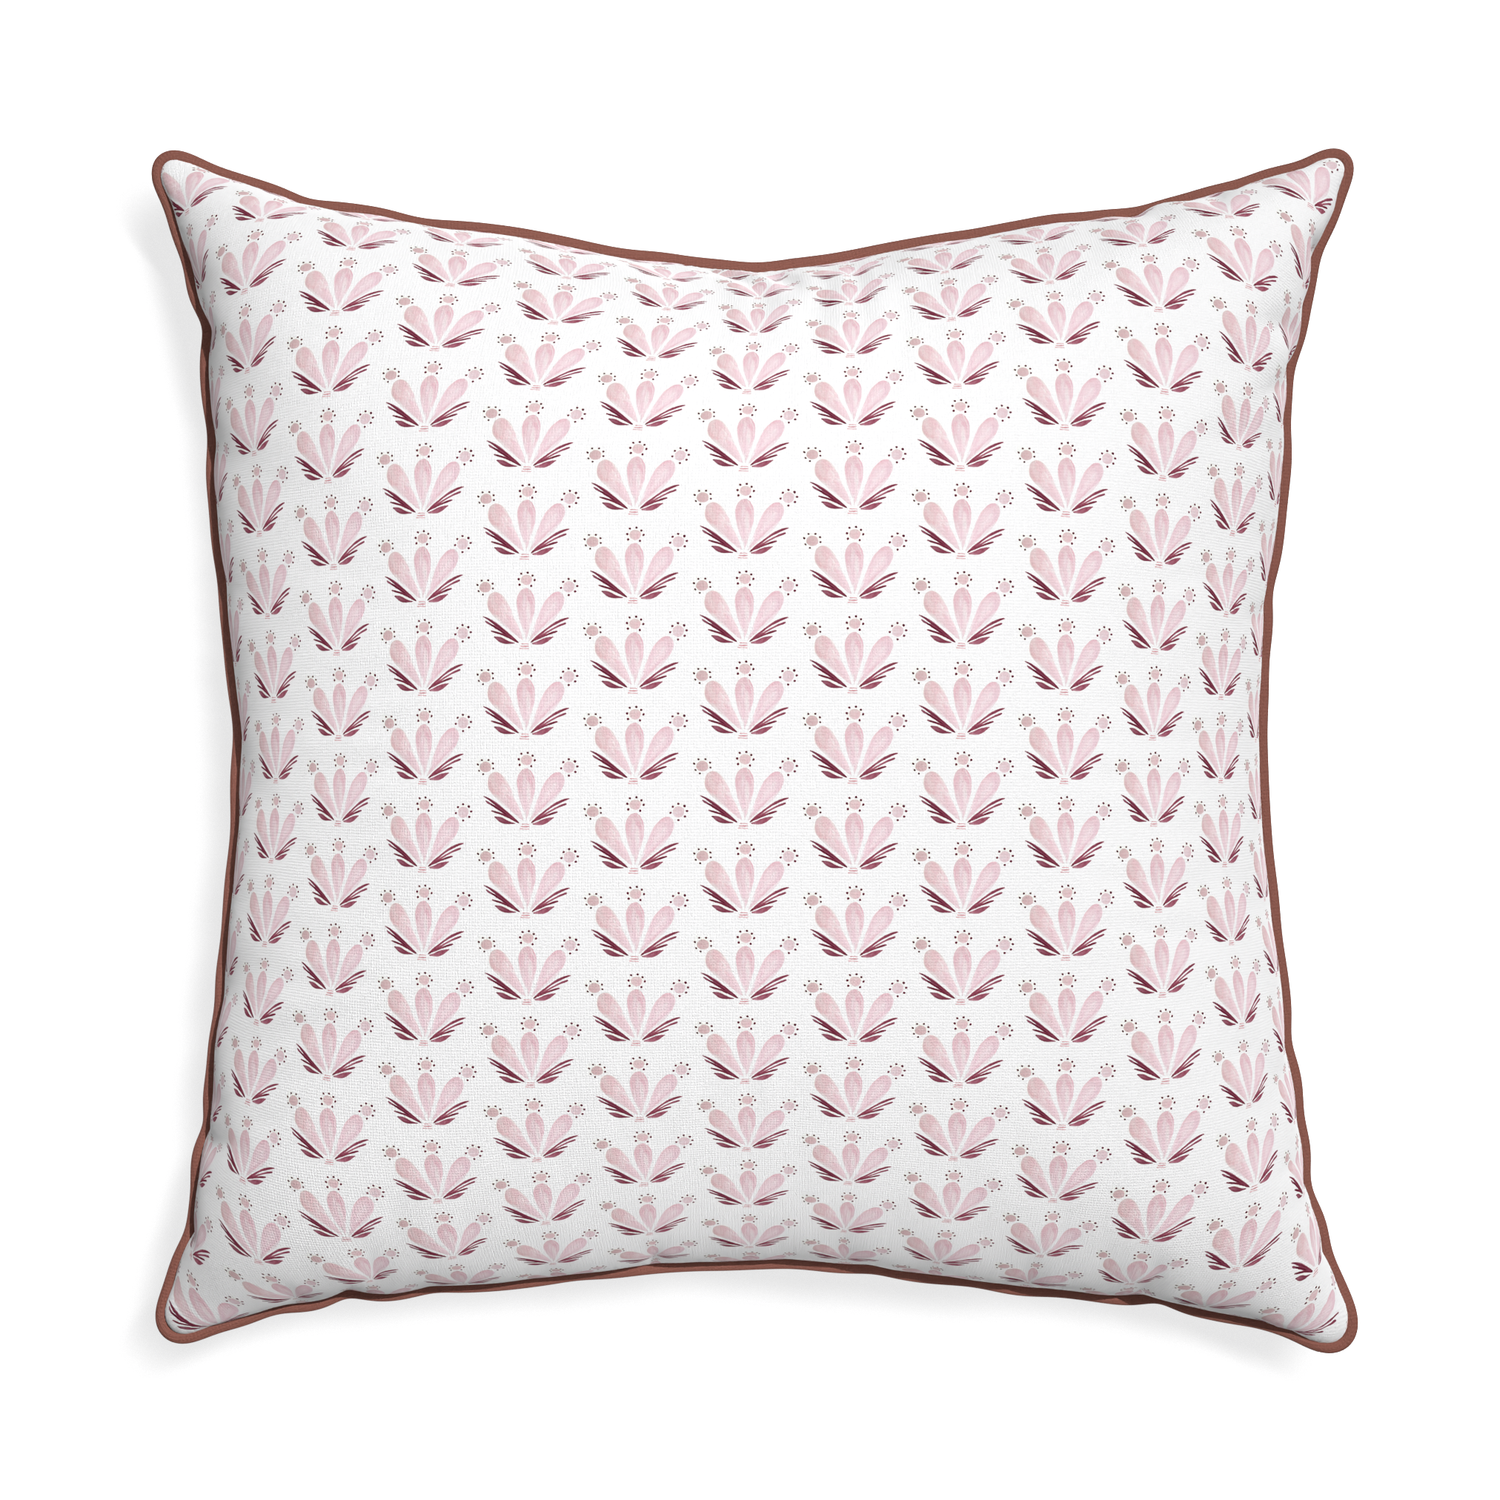 Euro-sham serena pink custom pink & burgundy drop repeat floralpillow with w piping on white background